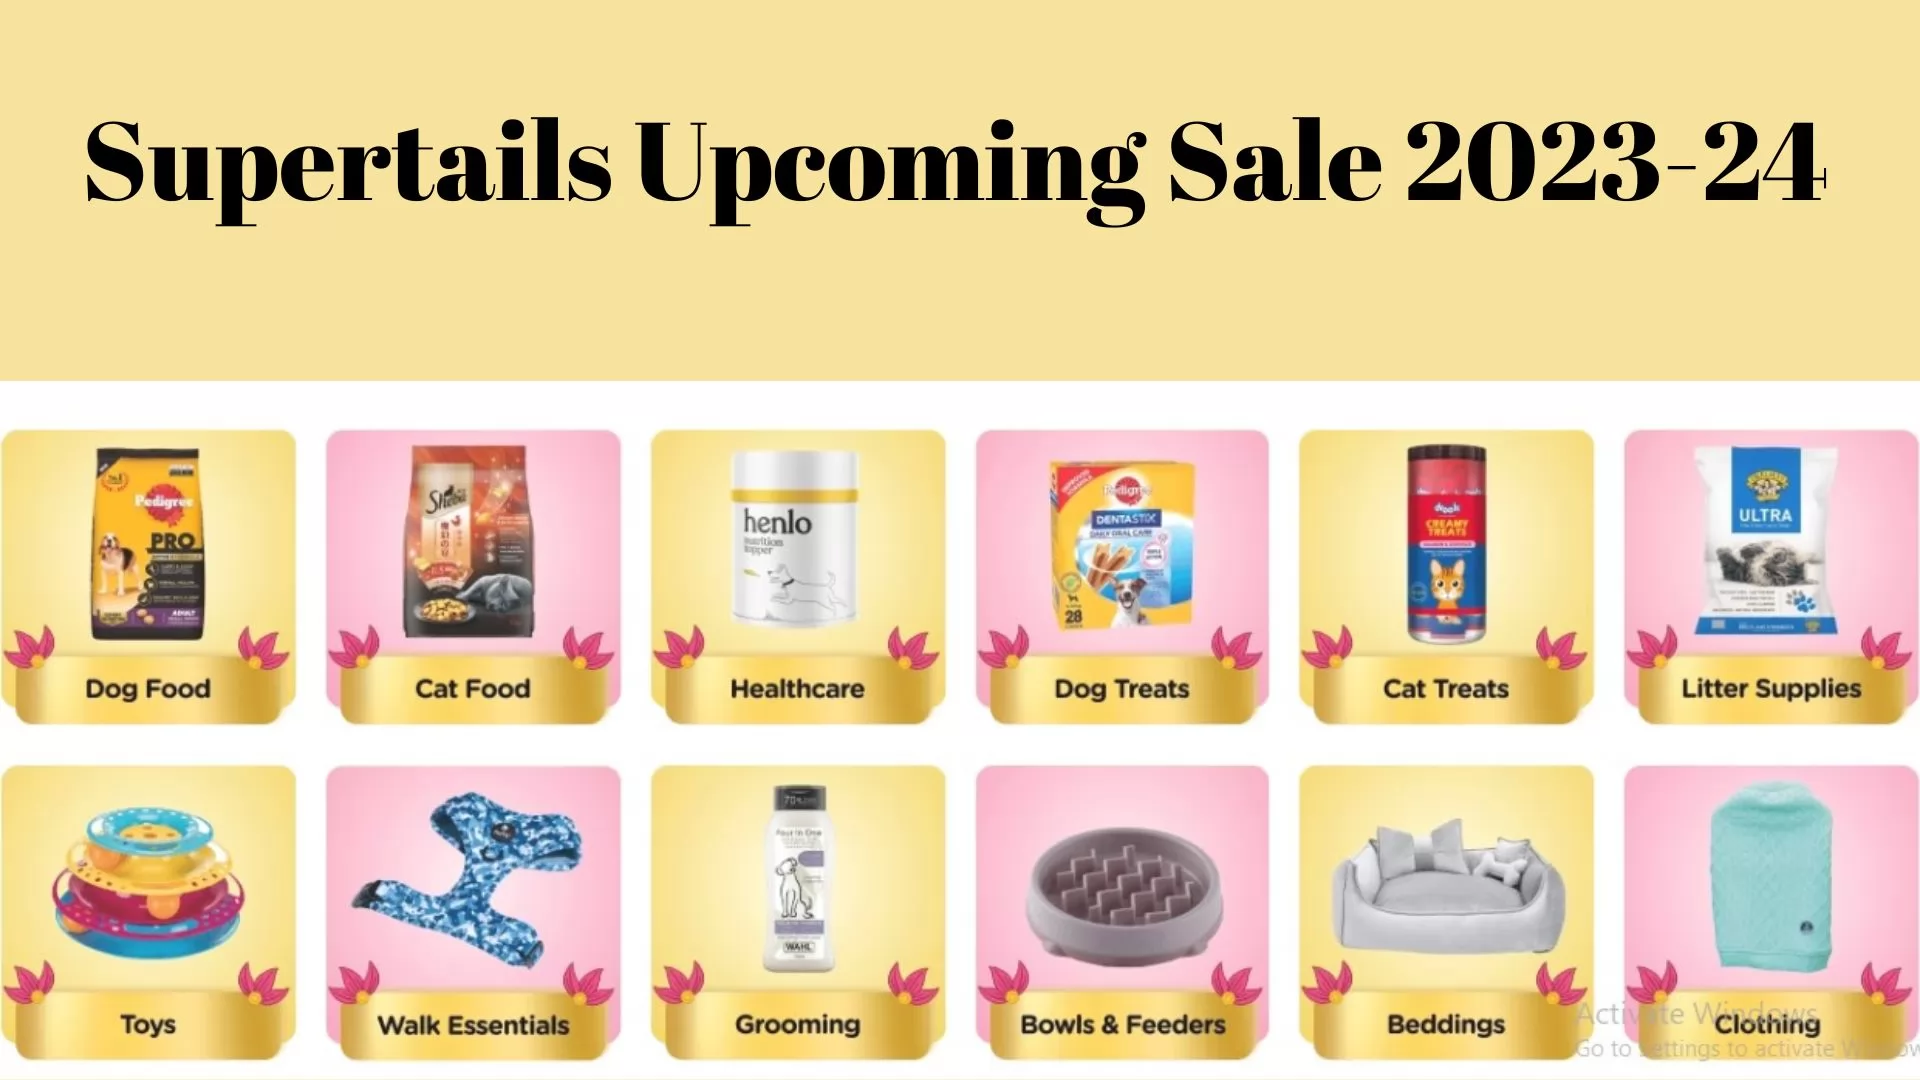 Supertails Upcoming Sale 2023-24